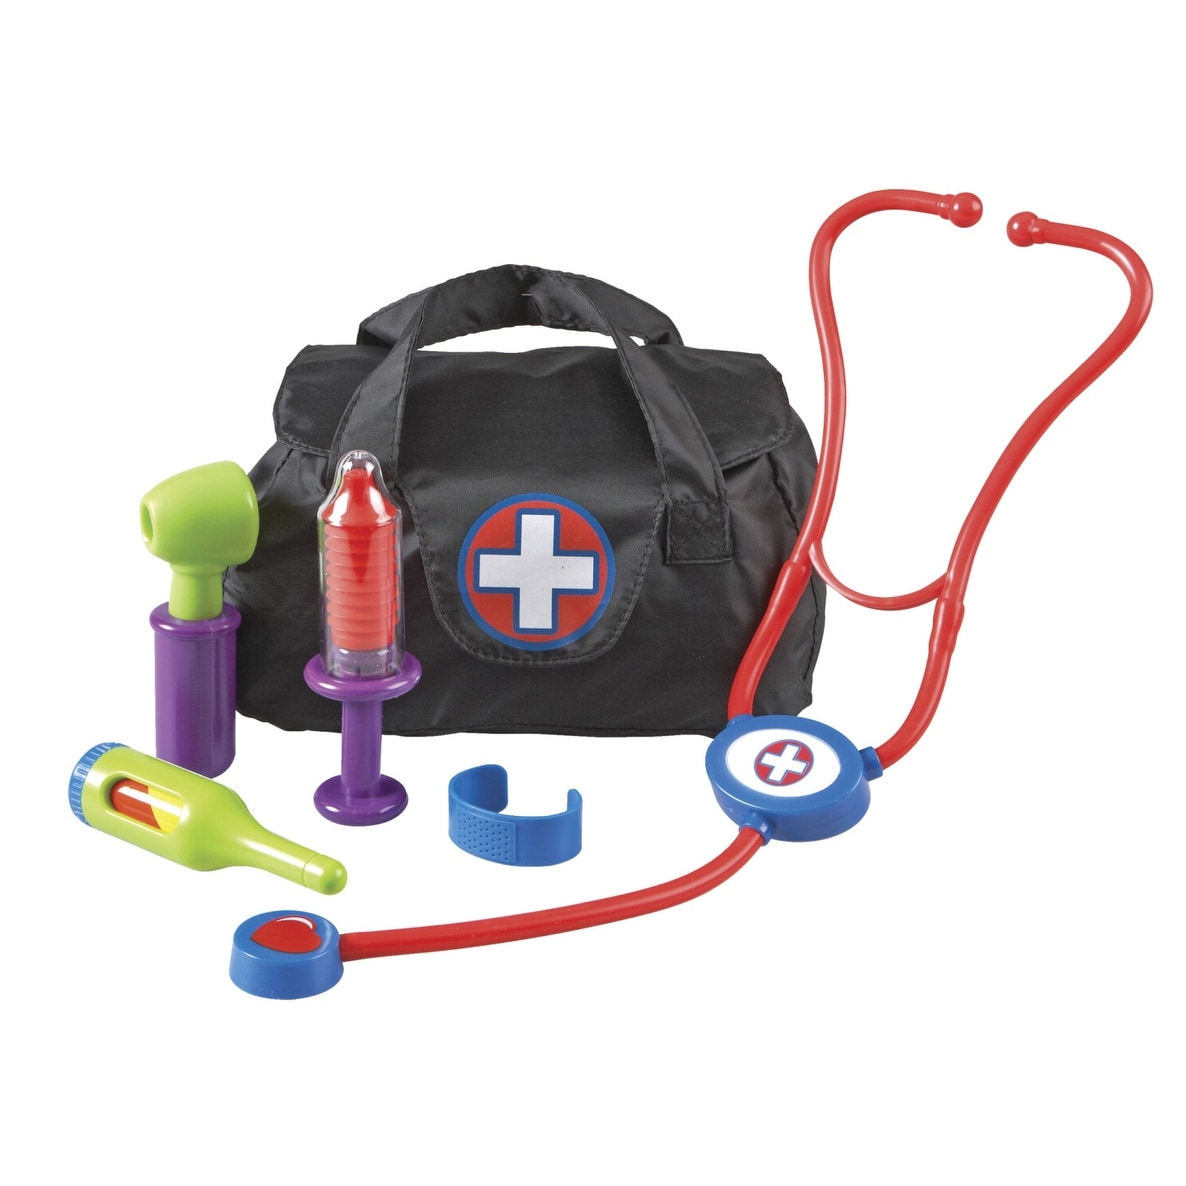 learning resources doctor set